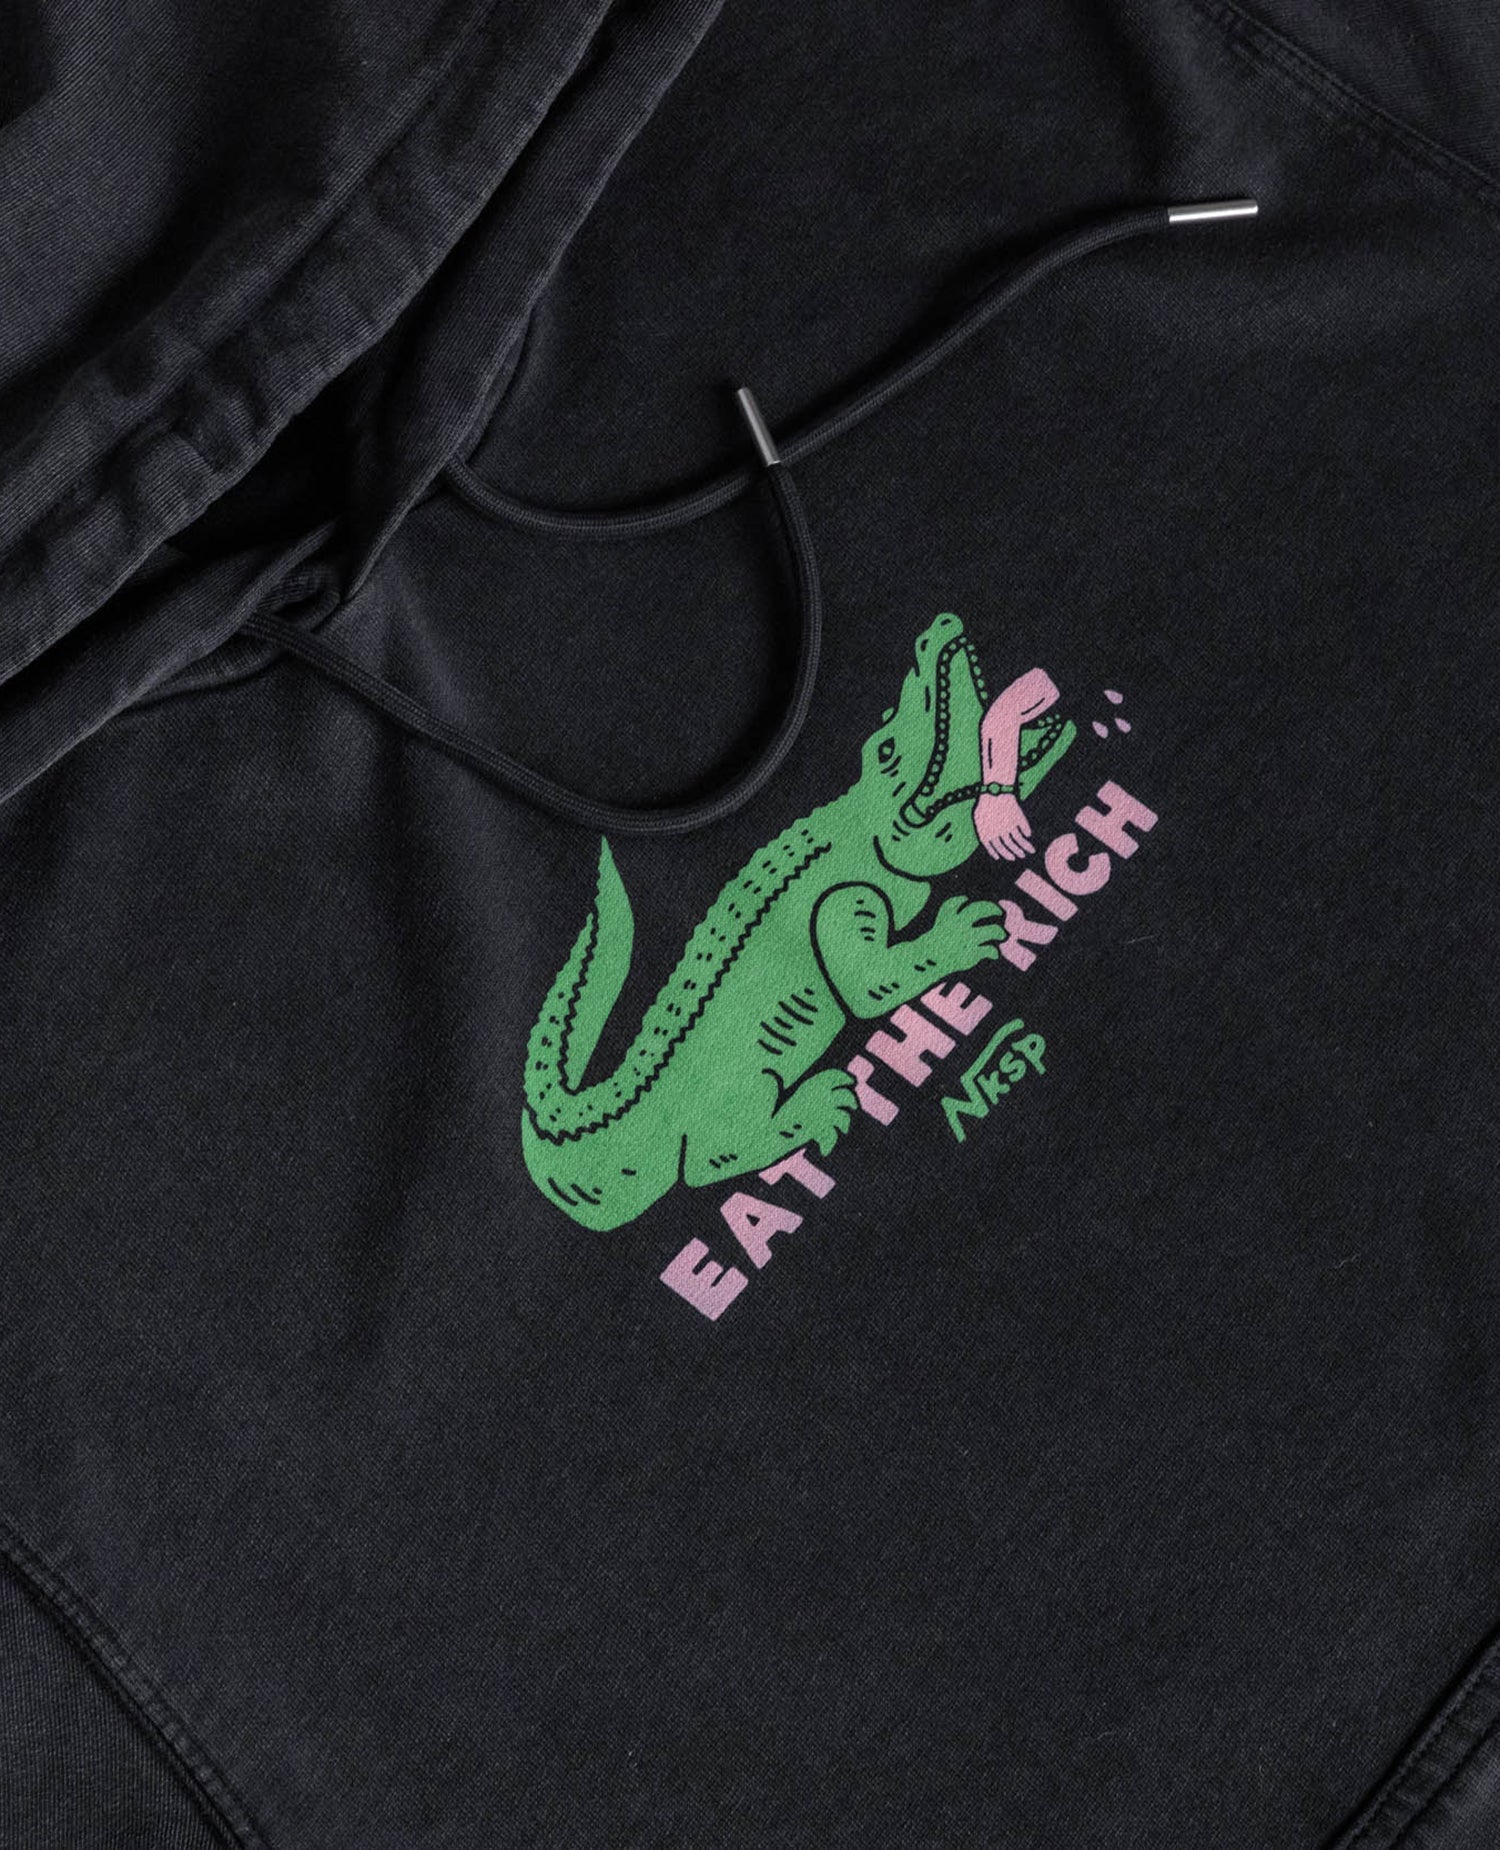 Eat The Rich X Hoodie